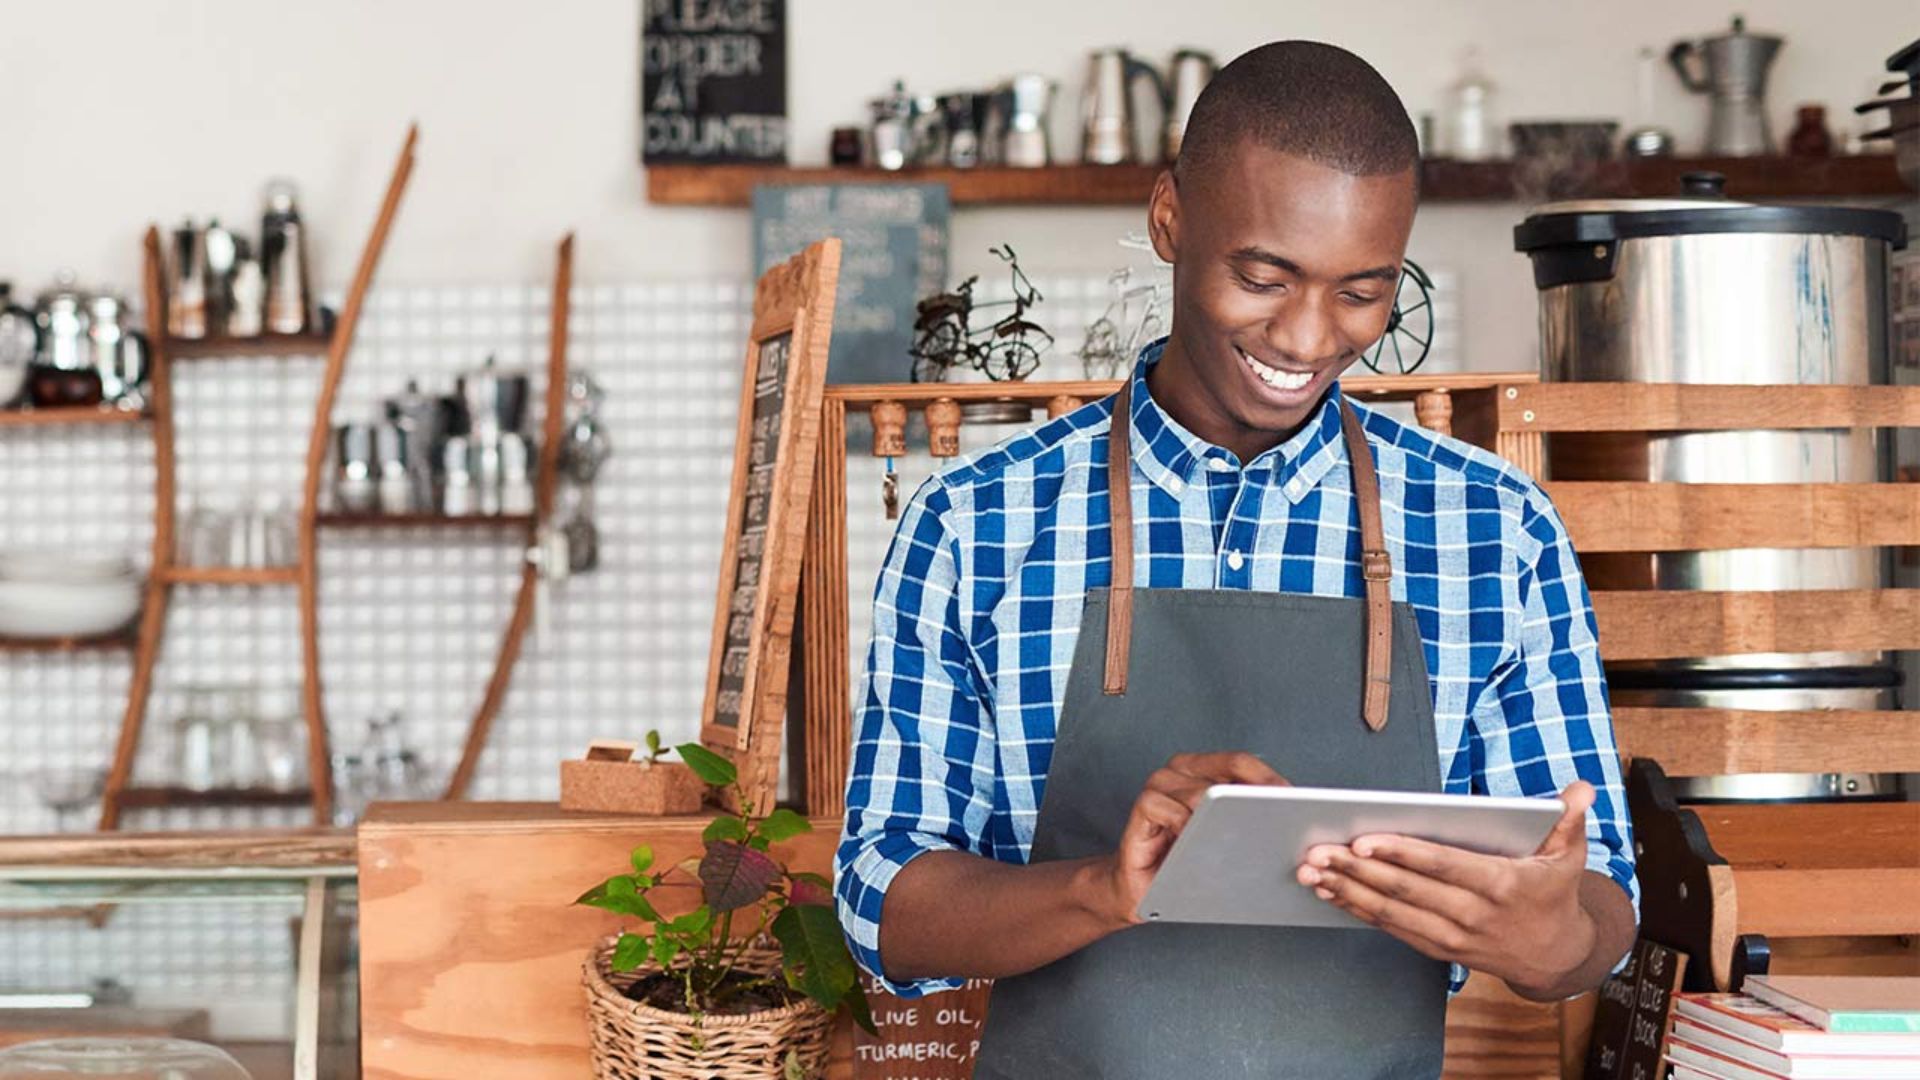 Mastercard has expanded its services to small businesses, introducing new tools to assist companies with payments, getting financing, defending themselves against cybercriminals, and more.